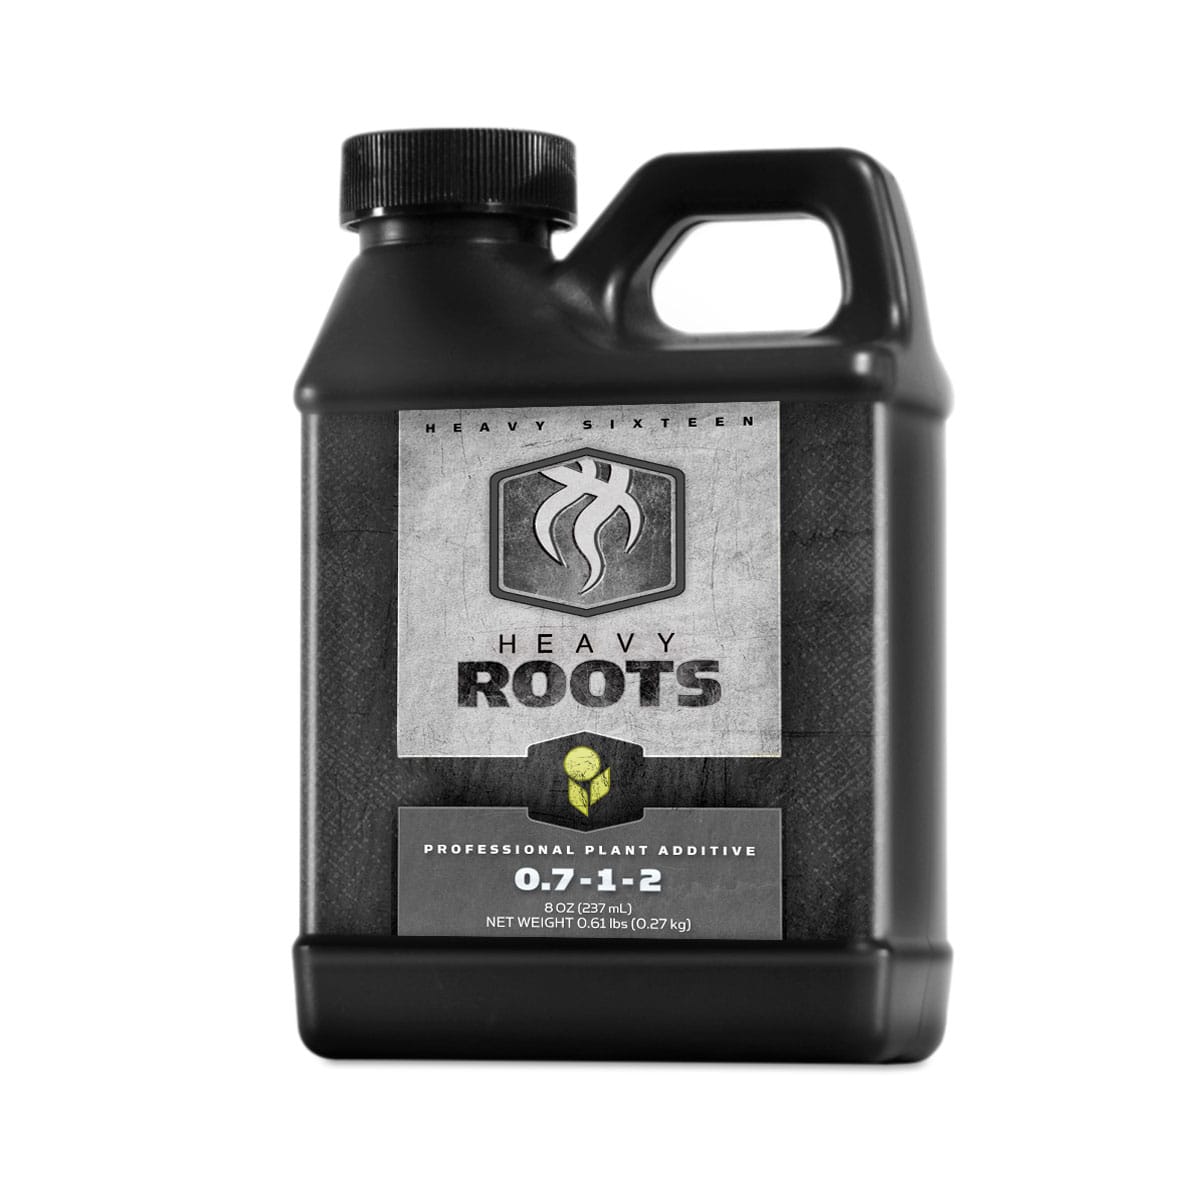 Heavy 16 Roots 8 Ounce